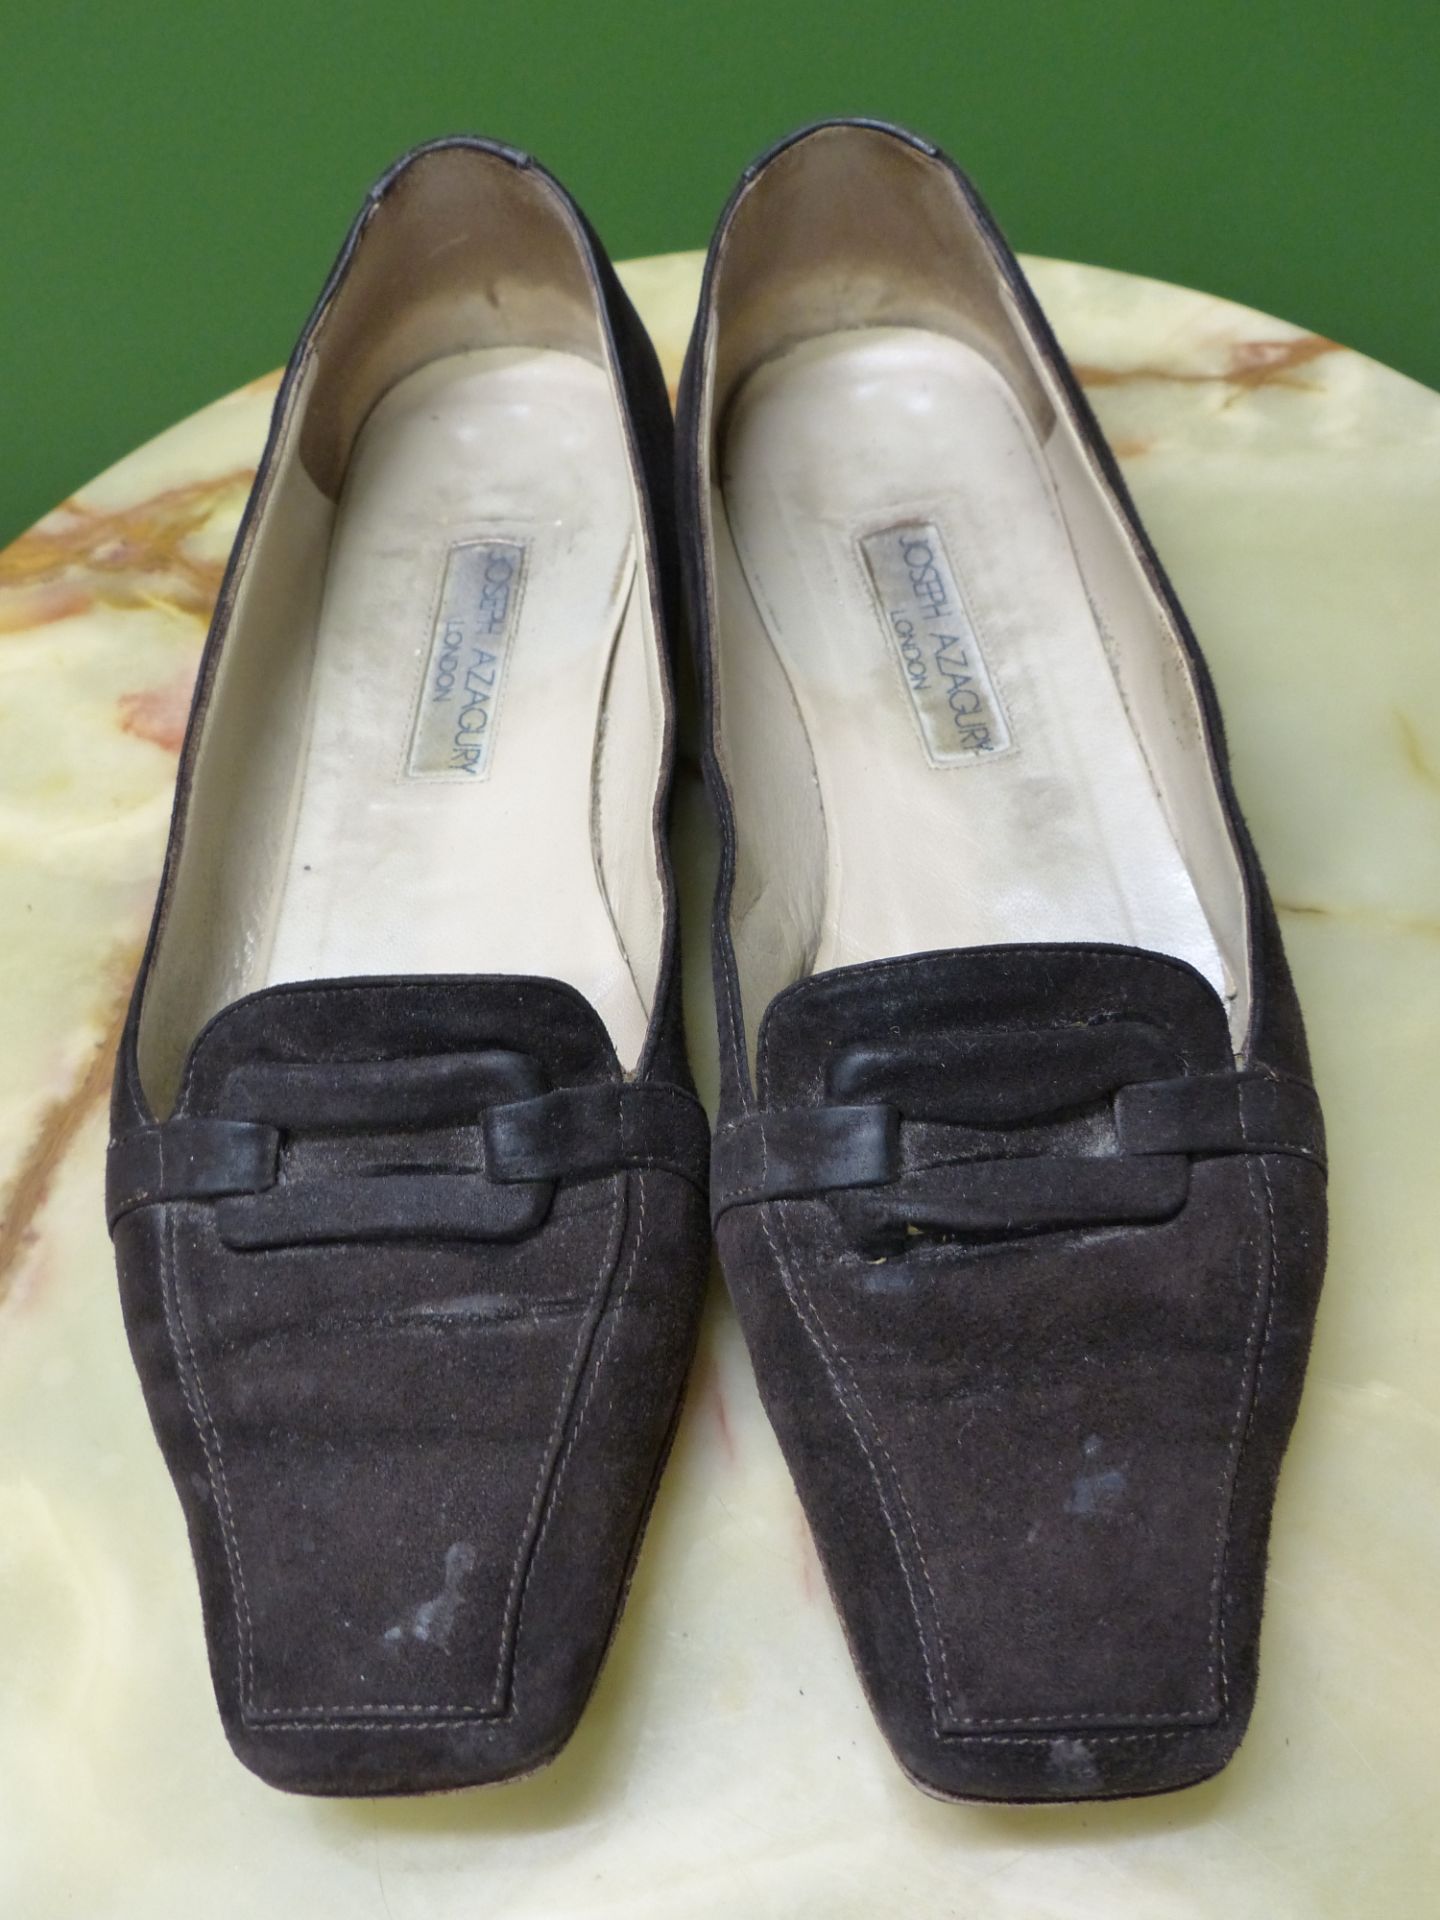 SHOES. THREE PAIR OF JOSEPH AZAGURY LONDON. SUEDE BROWN FLATS EUR SIZE 39. BLACK LEATHER AND SUEDE - Image 14 of 15